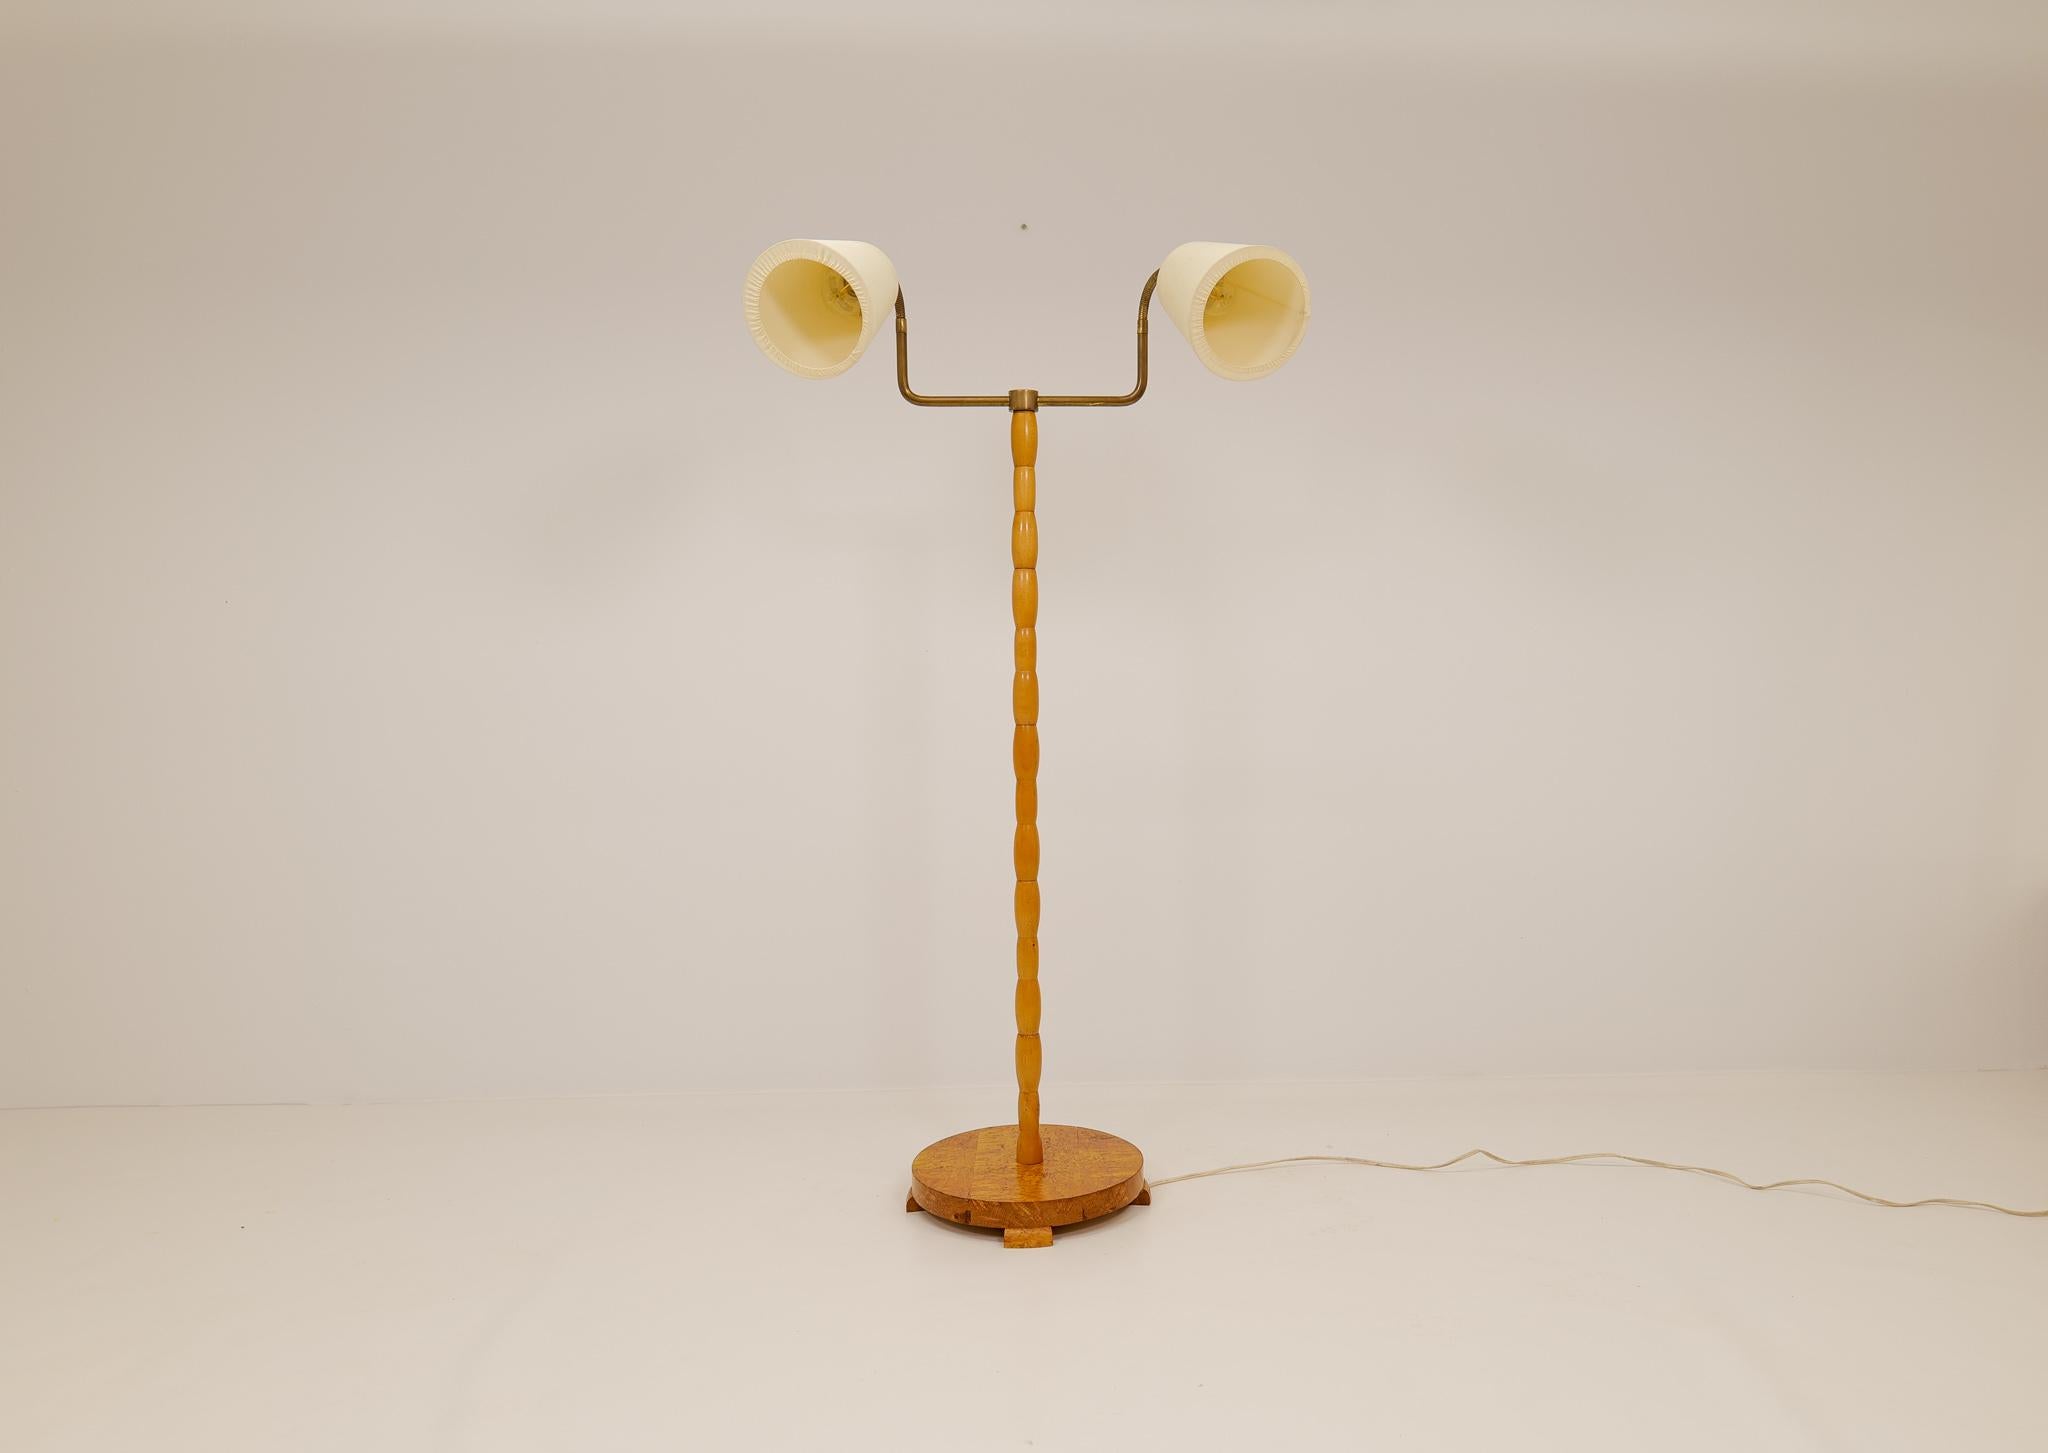 Nice looking organic floor lamp with a base in curly birch and the rod in lacquered birch with the top in brass. The lamp can be rotated, and the shades are adjustable. 

Goo vintage condition. 

Dimensions: H 145 cm W 70cm Base 35 cm.
   